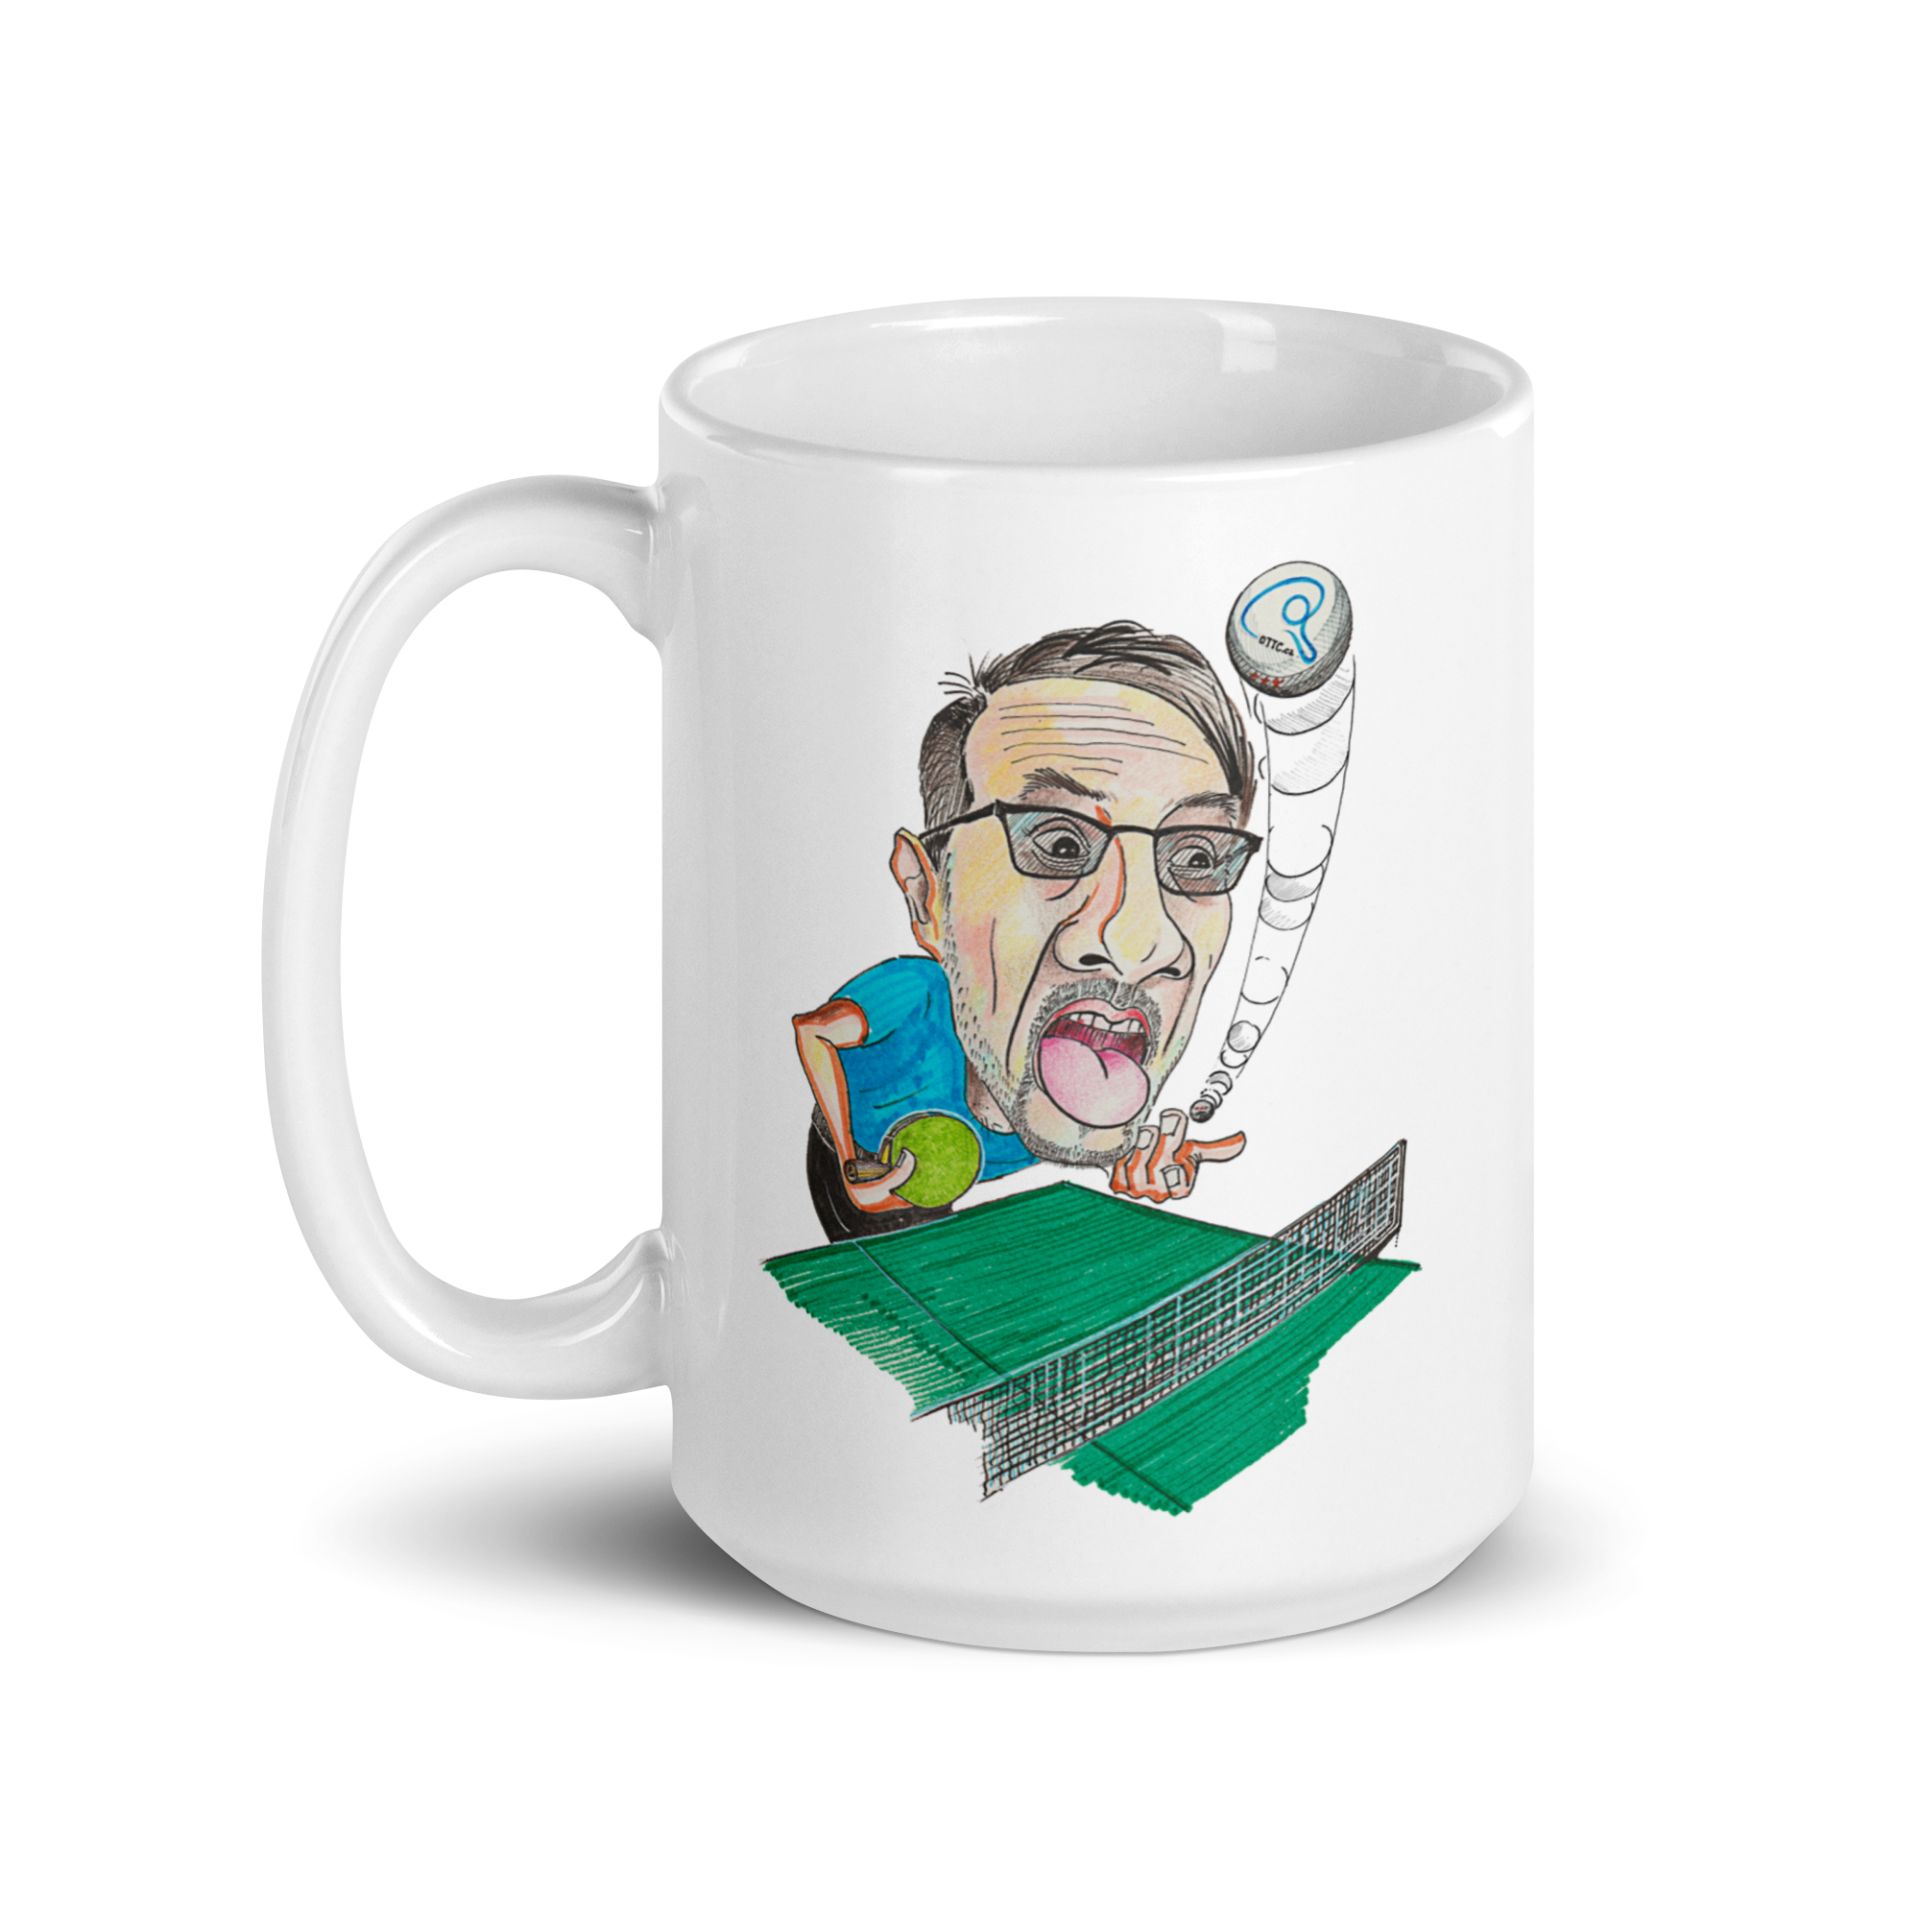 EyeXcite's "Sketch & Toon Mugs" transforms your favorite moments into artful sips! It is a perfect personalized mug for you or your loved ones.